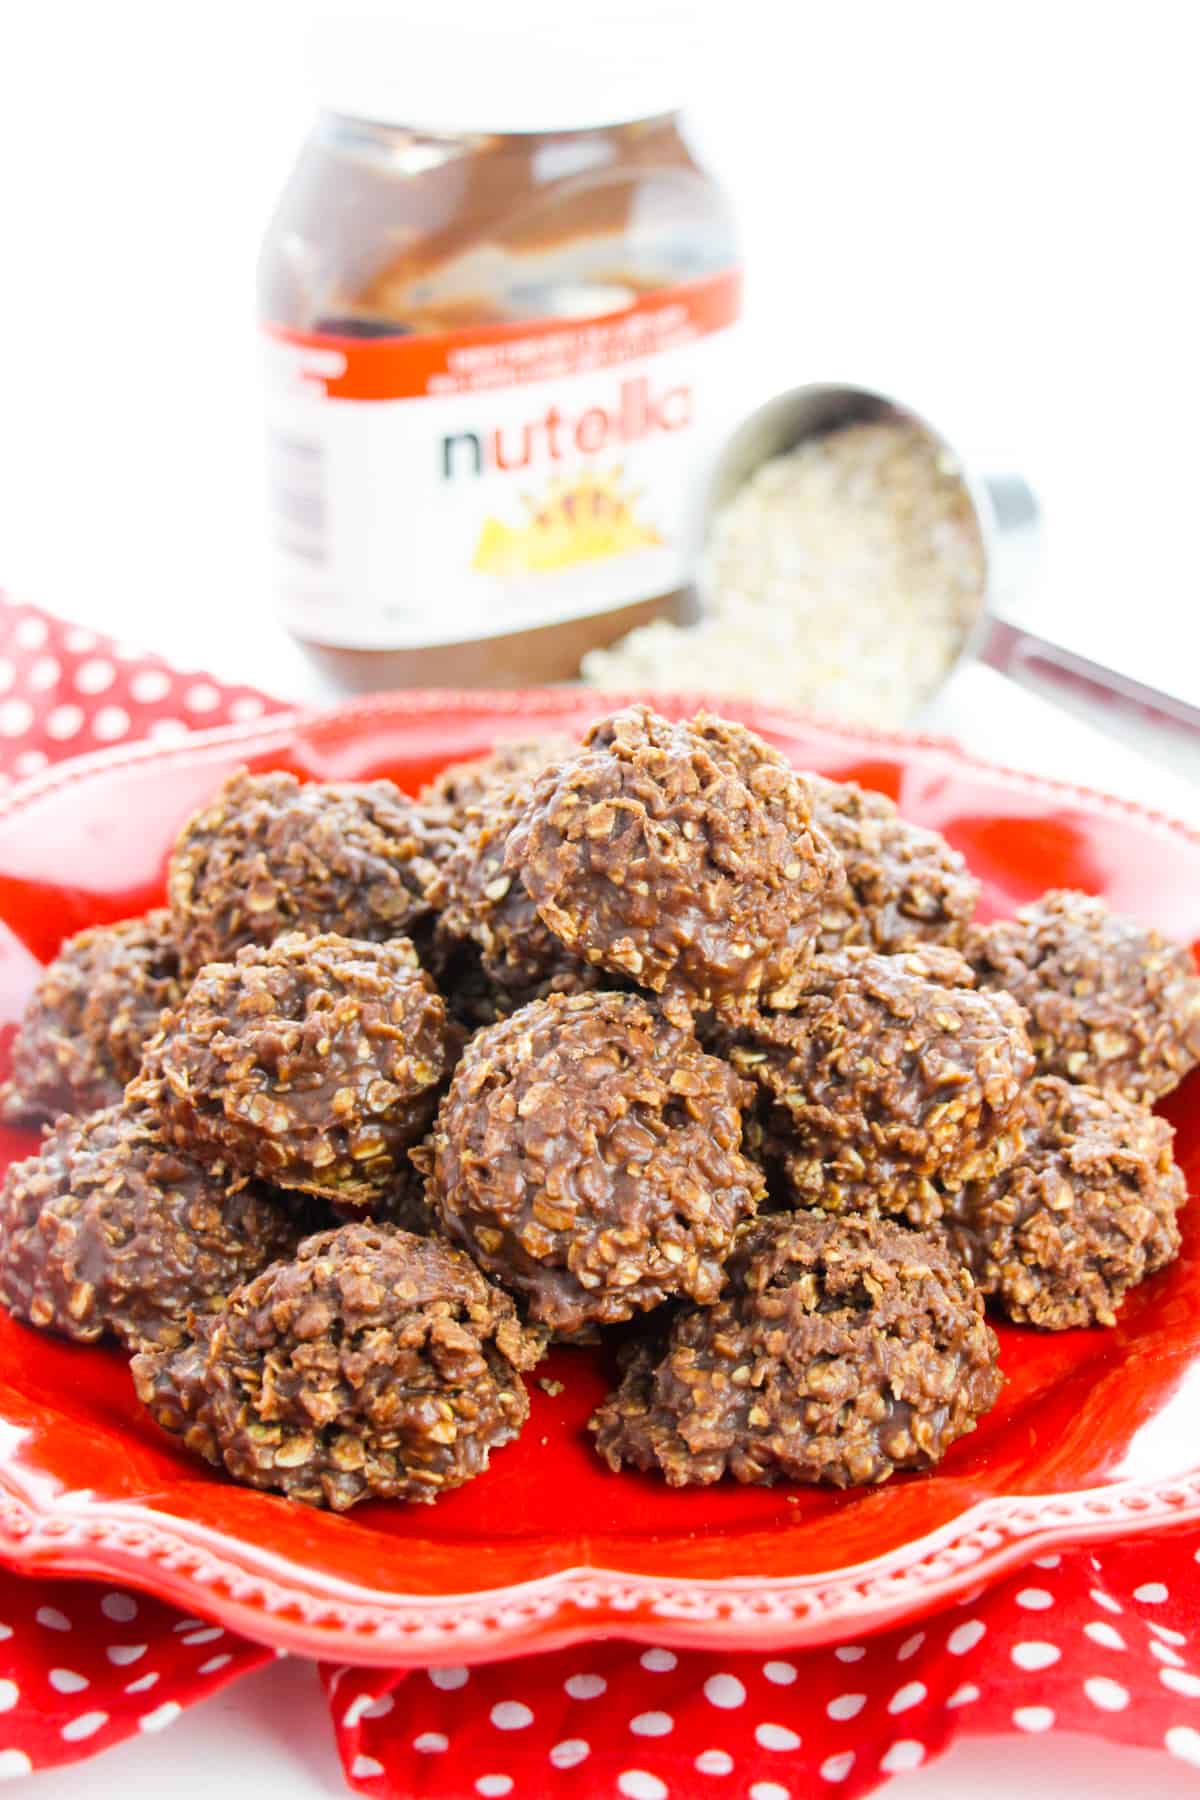 No-bake Nutella Cookies piled on a red plate with scoop of oats and jar of nutella spread behind them